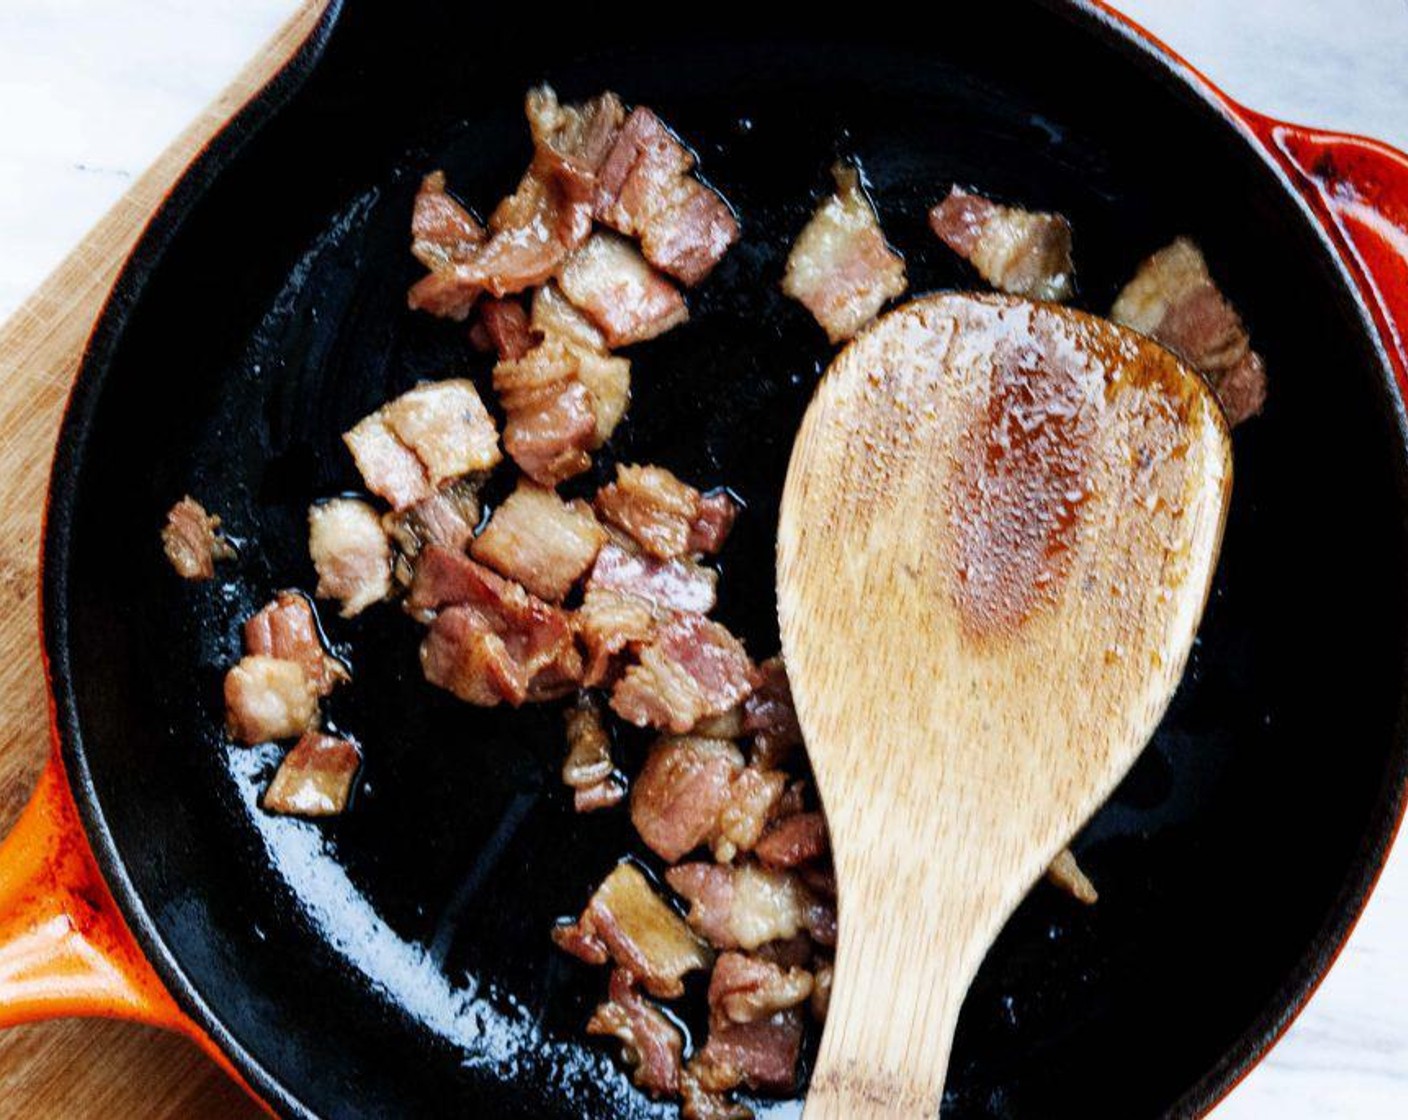 step 2 Fry the bacon in a hot skillet. No need to add any oil, the fat from the meat will be enough. Set aside.